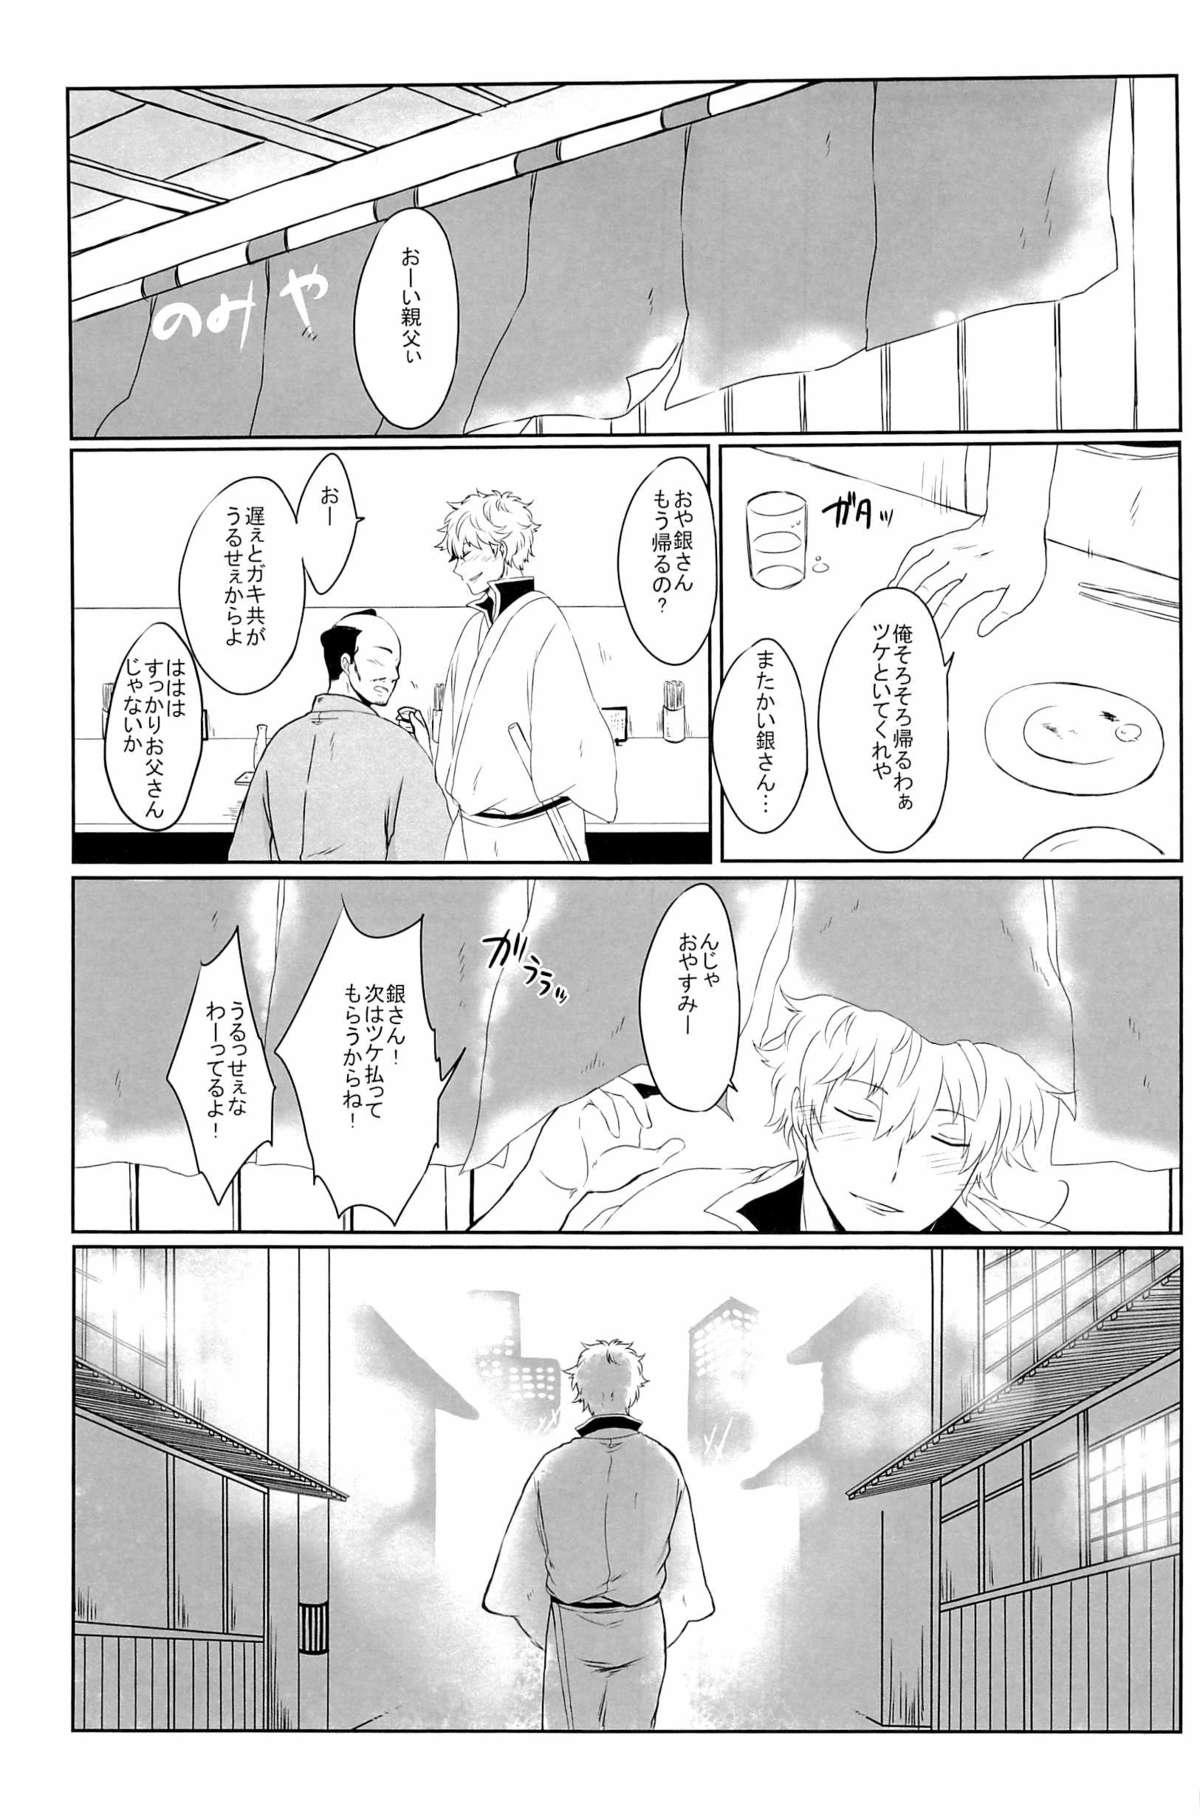 Sexteen 性拷問 - Gintama Chacal - Page 5